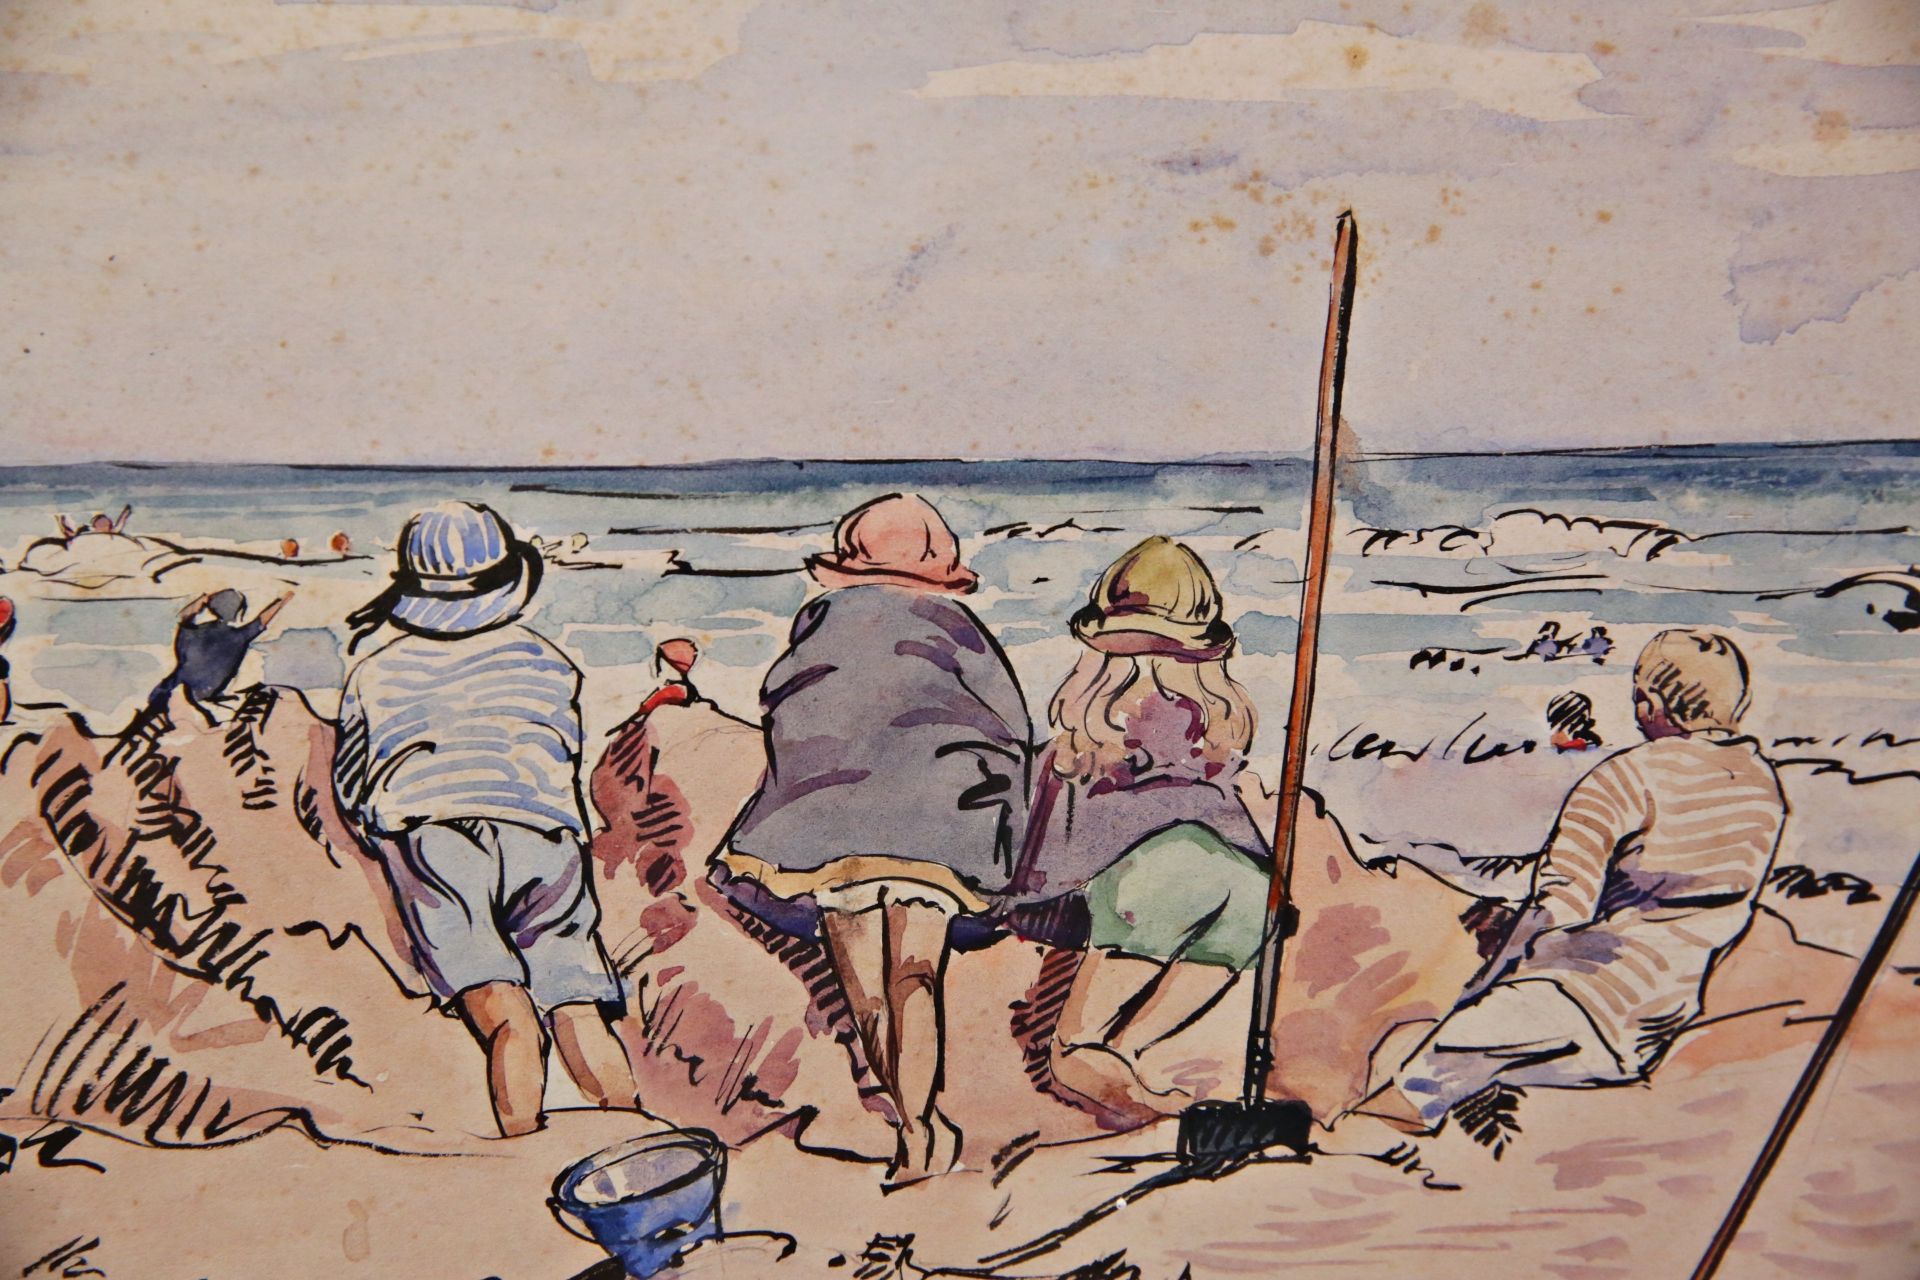 Leon HAUDEVILLE (1885-1969) "Children at the beach", watercolor on paper, French painting, 20th _. - Bild 4 aus 5